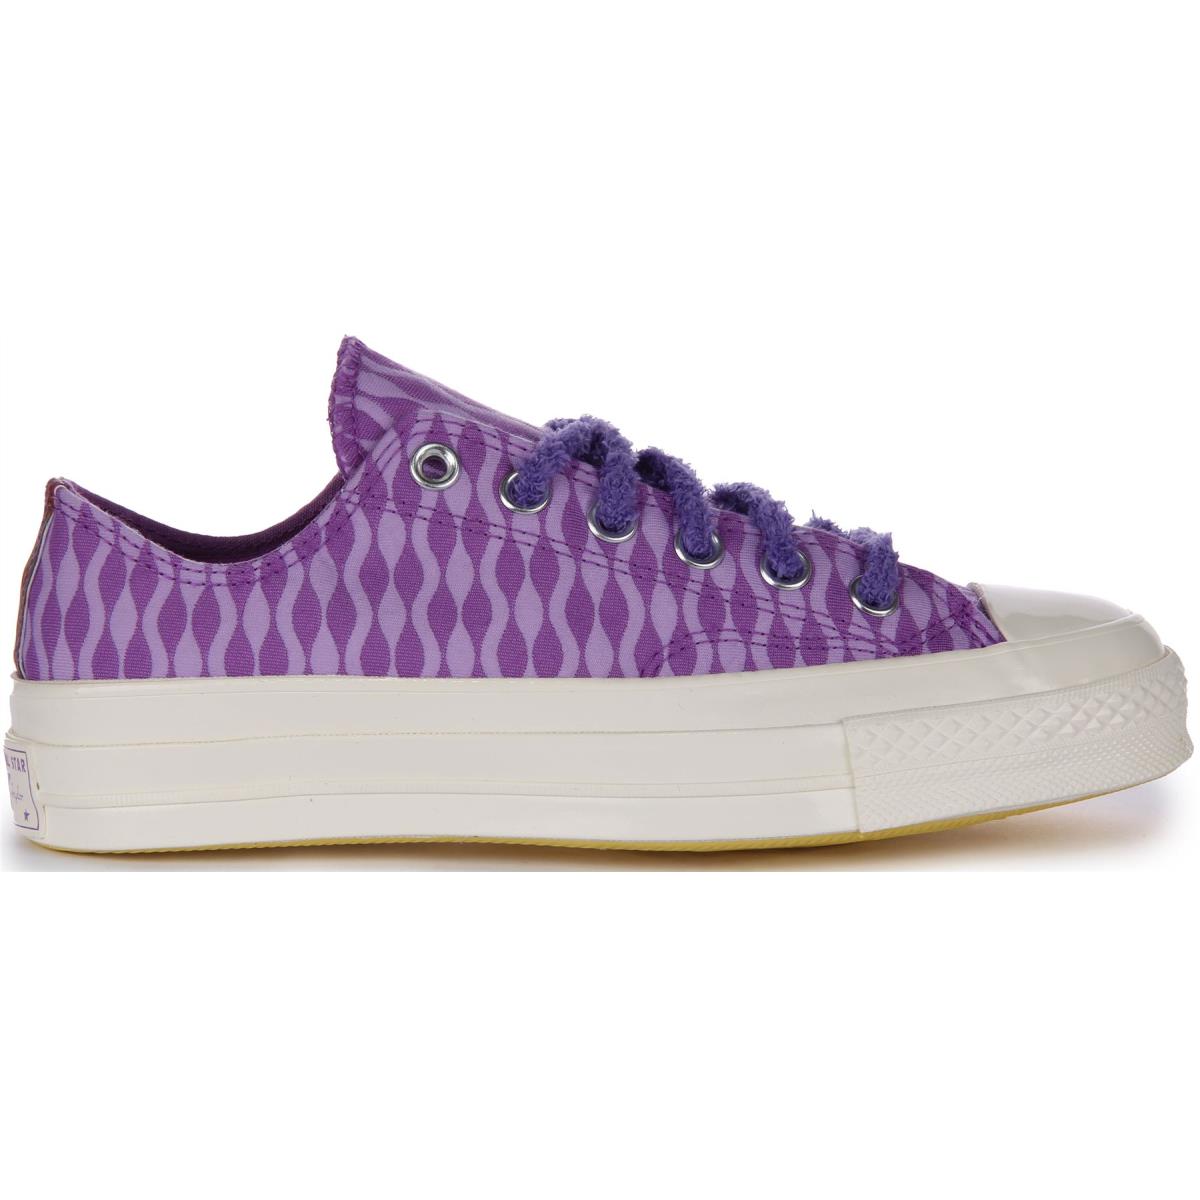 Converse A05023C Chuck 70 Granddaddy Leather Low Top Shoe Purple Size US 5 - 10